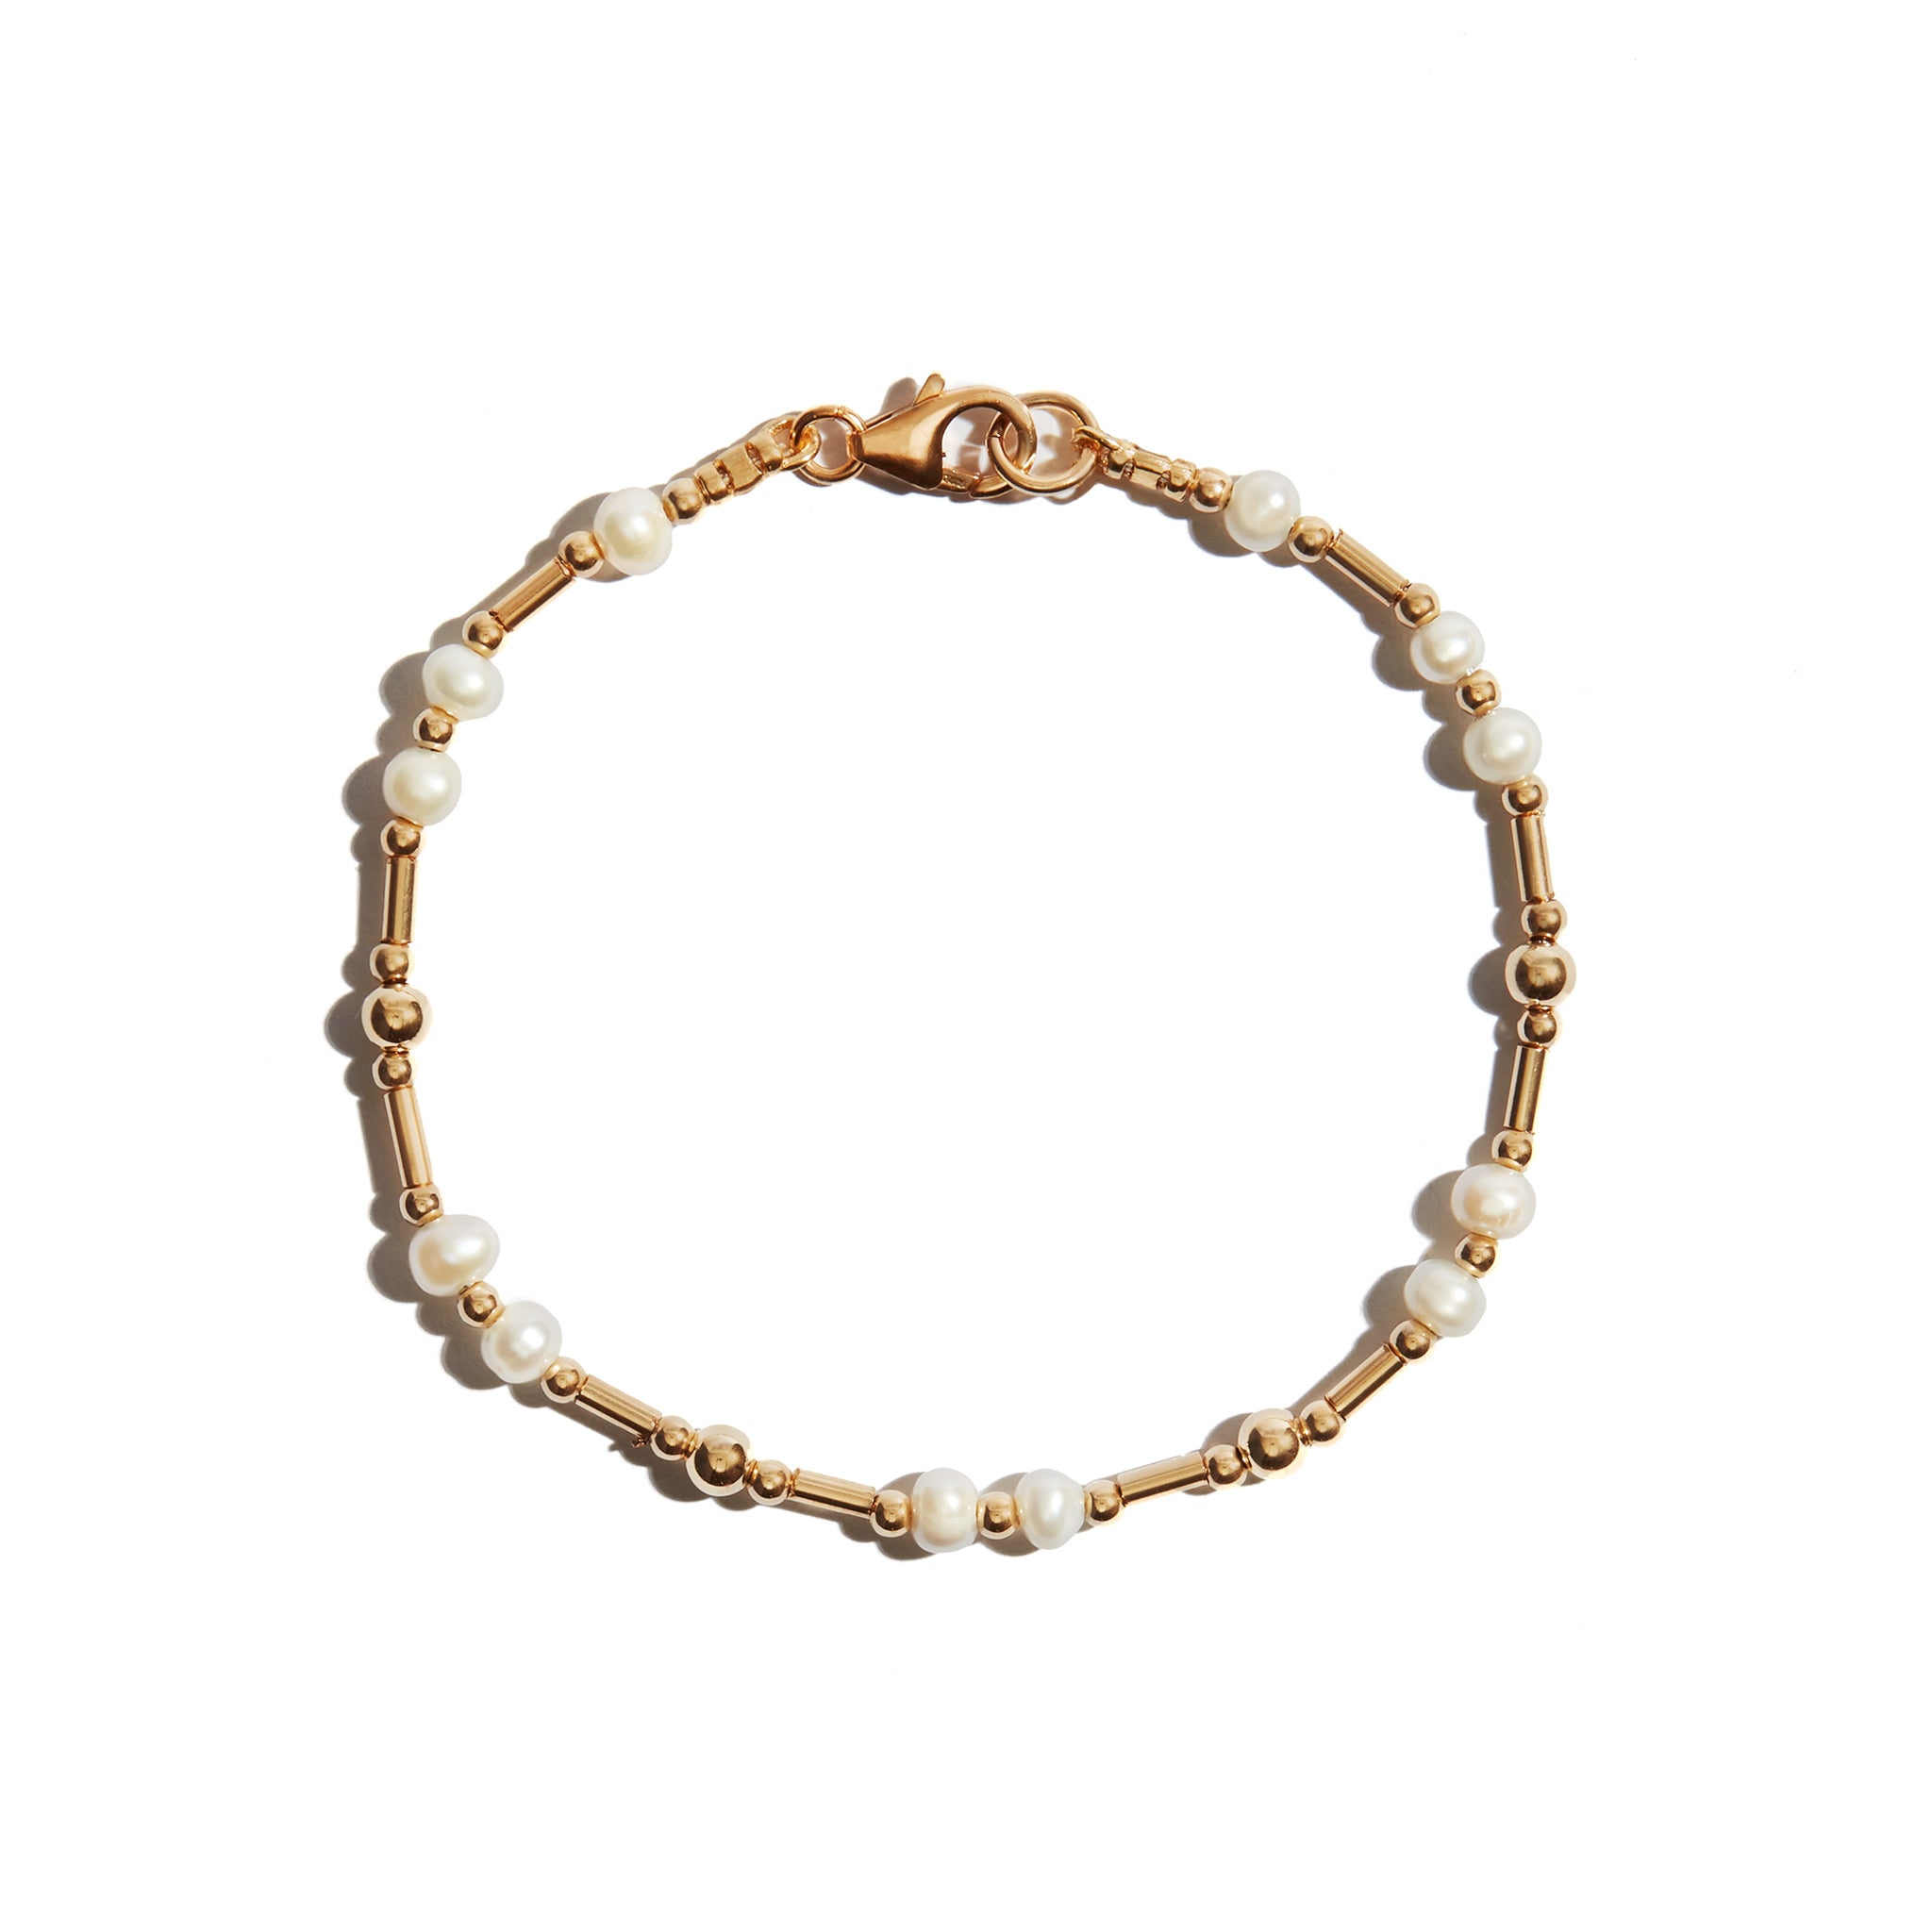 Our Duo Pearl Bracelet is a beautiful, delicate beaded bracelet featuring pearl beads to add a touch of elegance and femininity. Perfect on its own for a bridal look or simply to add a touch of elegance to your look every day. This bracelet's simple yet beautiful design makes it wonderfully versatile.